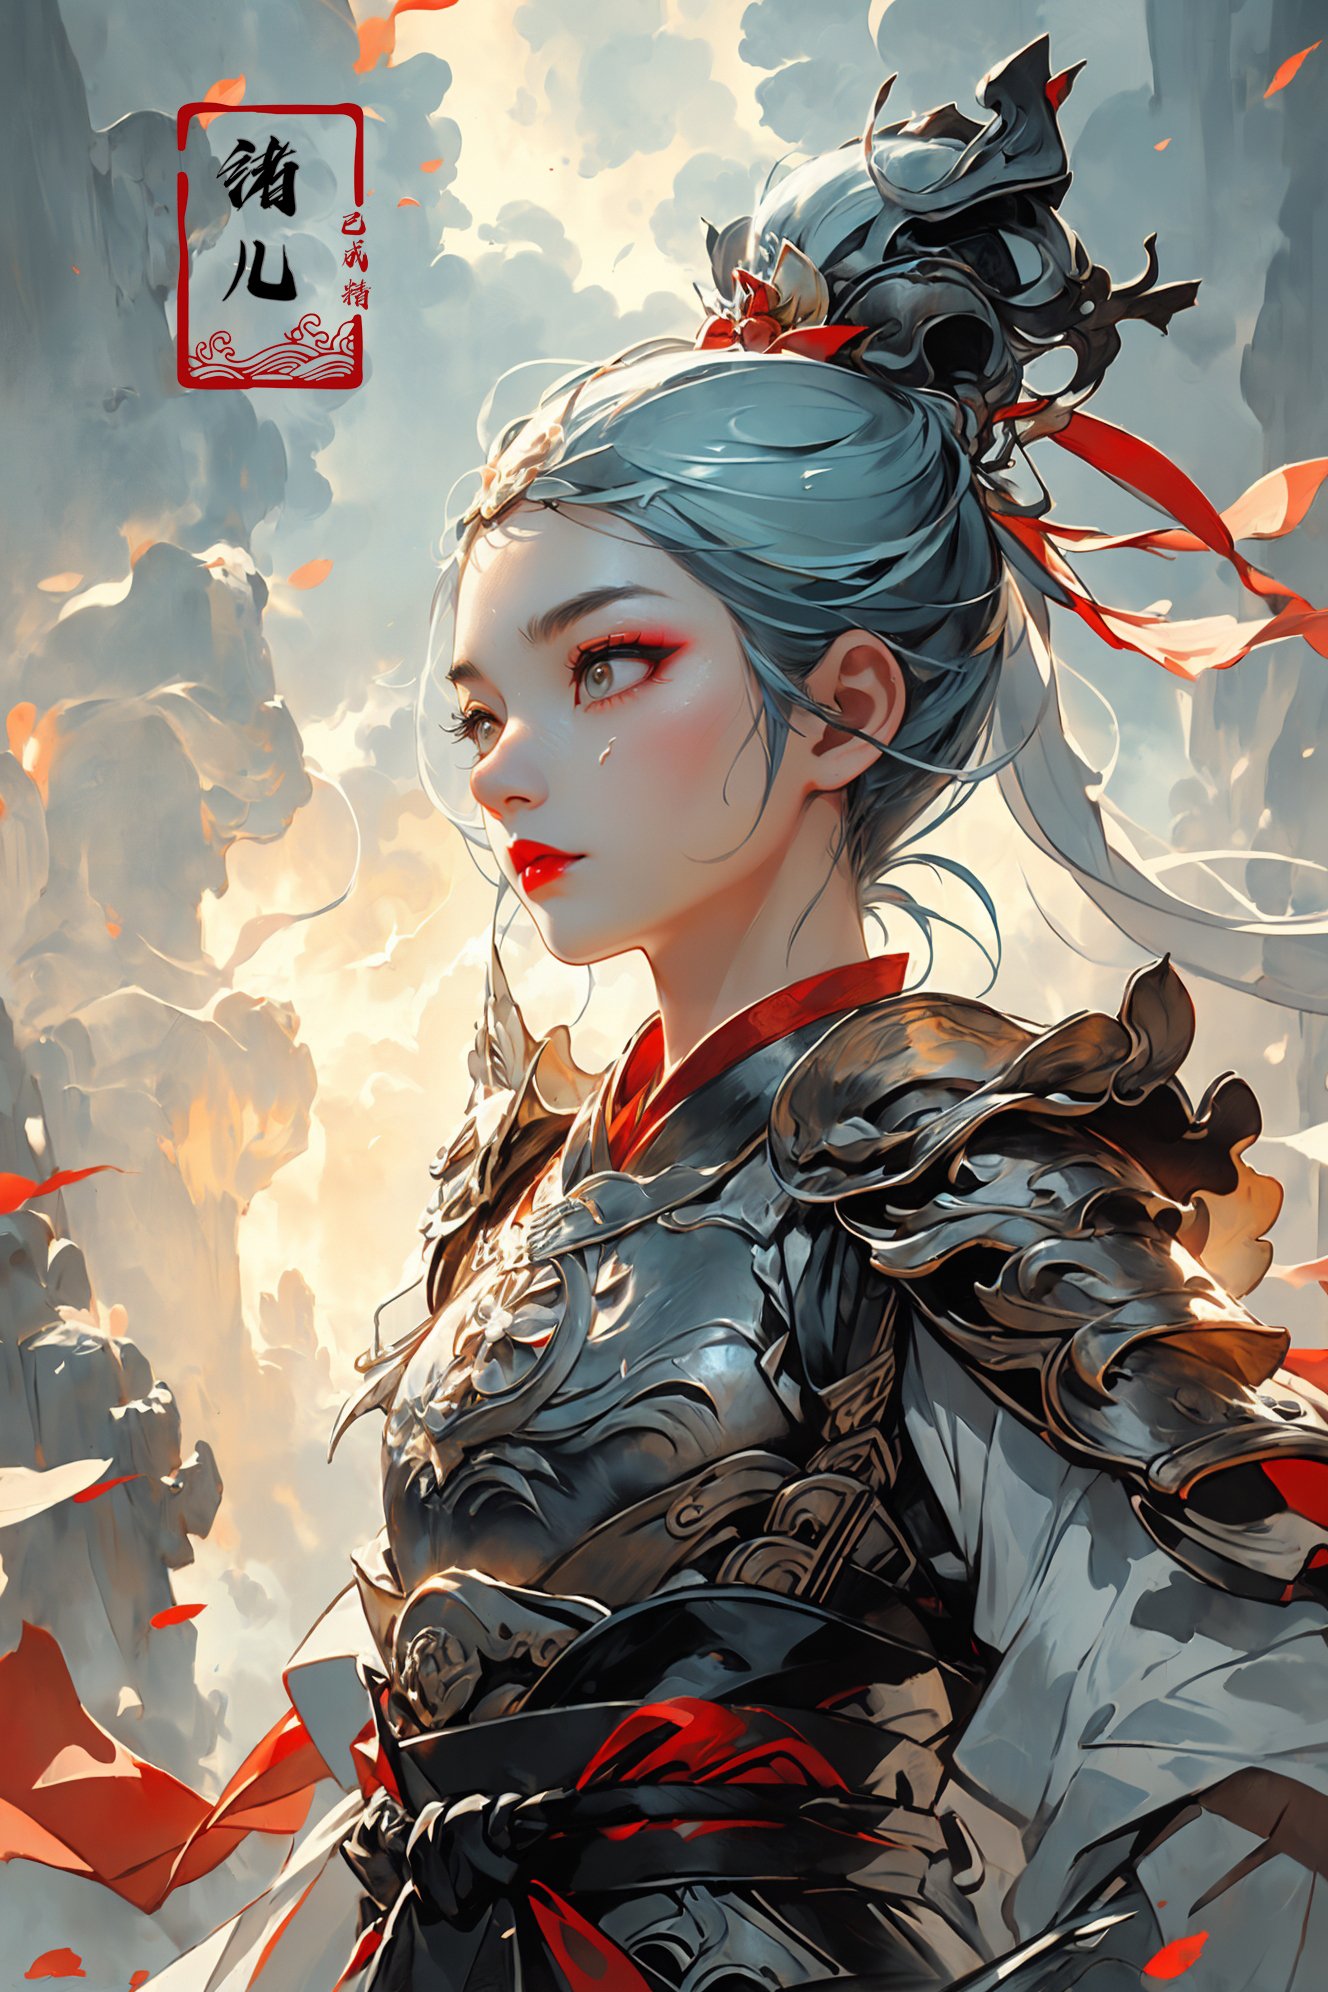 Dynamic Angle, Perspective, High Point,pov，1woman, xuer Ancient Chinese armor,  shoulder armor，holding weapon, Chinese sword，(full body:1.1), A mature face，sideways glance, (cold attitude,eyeshadow,eyeliner:1.1),(red lips:1.3),watery eyes,   (Milky skin:1.2), (shiny skin:1.4)，(long legs:1.3),  (upper body:1.5)，A shot with tension，(sky glows blue,Visual impact,giving the poster a dynamic and visually striking appearance:1.2),Chinese Zen style,impactful picture,<lora:绪儿-中国铠甲 xuer Ancient Chinese armor:0.8>